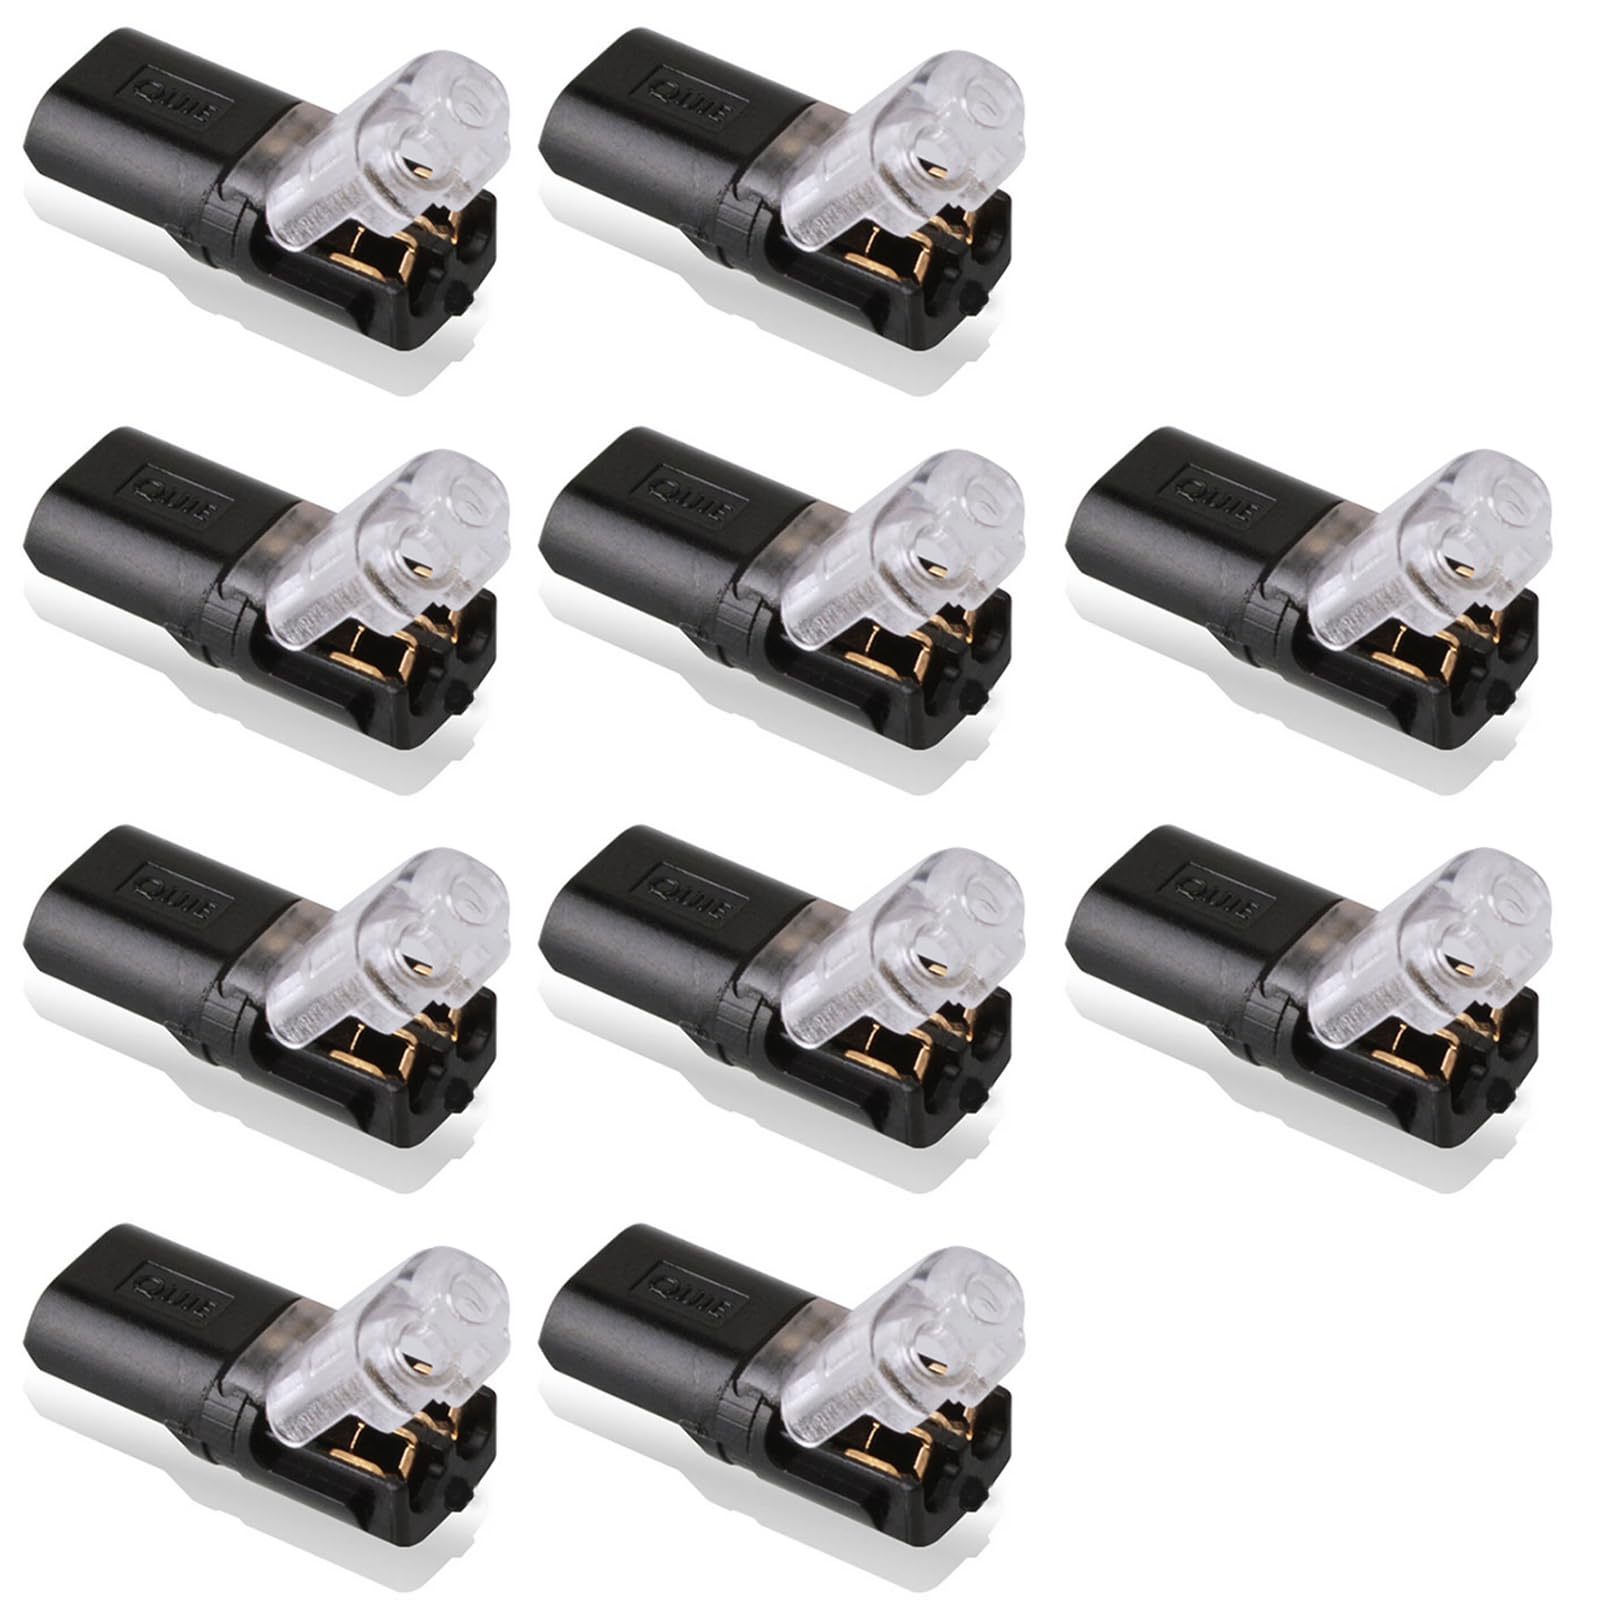 Hardware connectors or cables